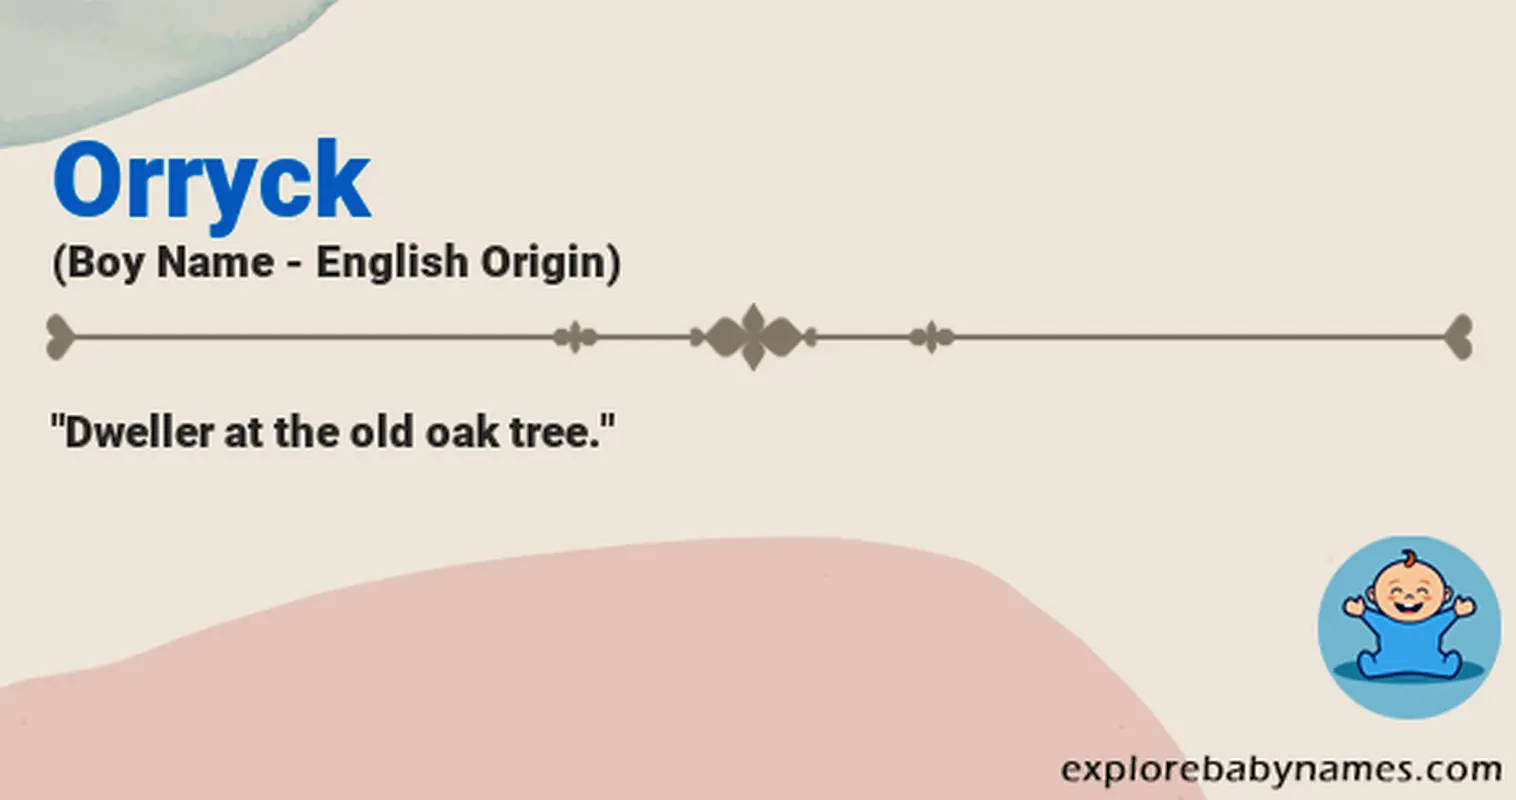 Meaning of Orryck